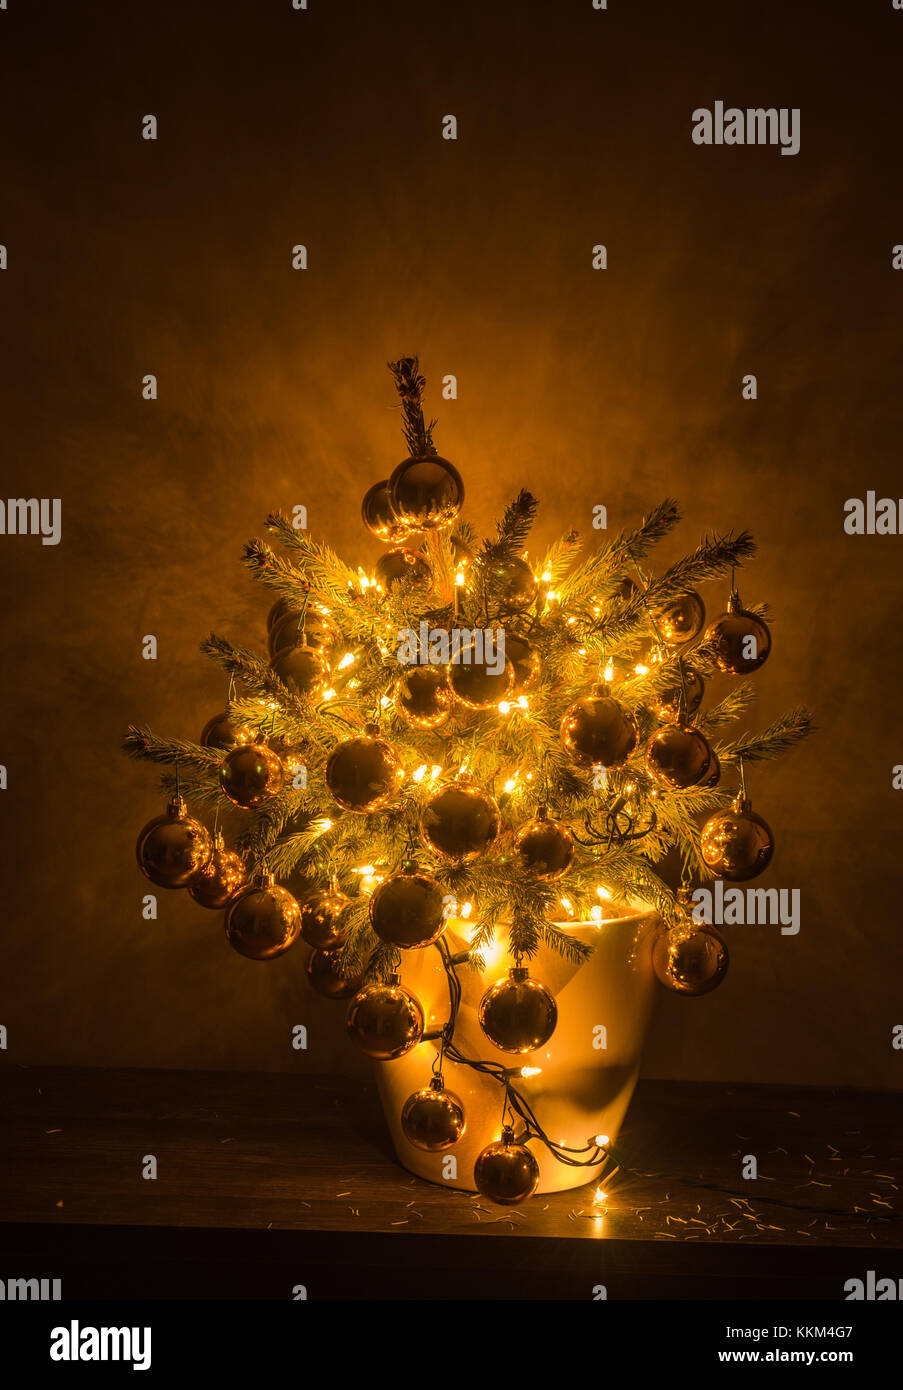 Small Christmas tree with luxury baubles and warm lights, in a white plastic flowerpot, with the dark background. Stock Photo